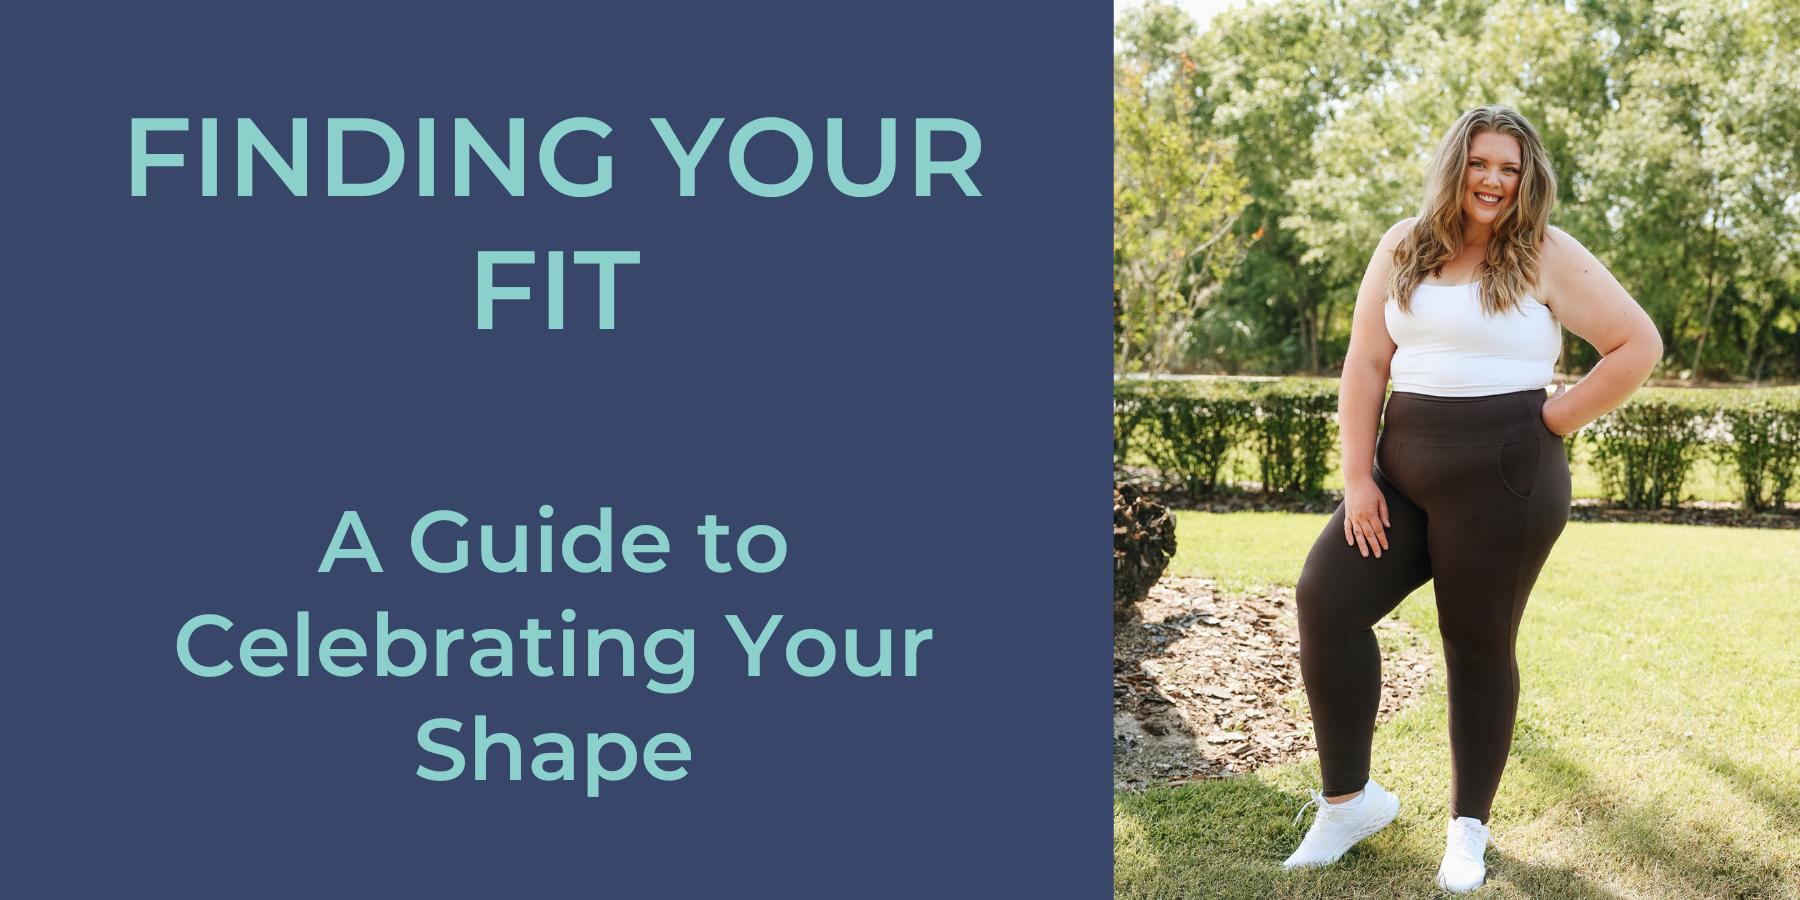 Finding Your Fit: A Guide to Celebrating Your Shape